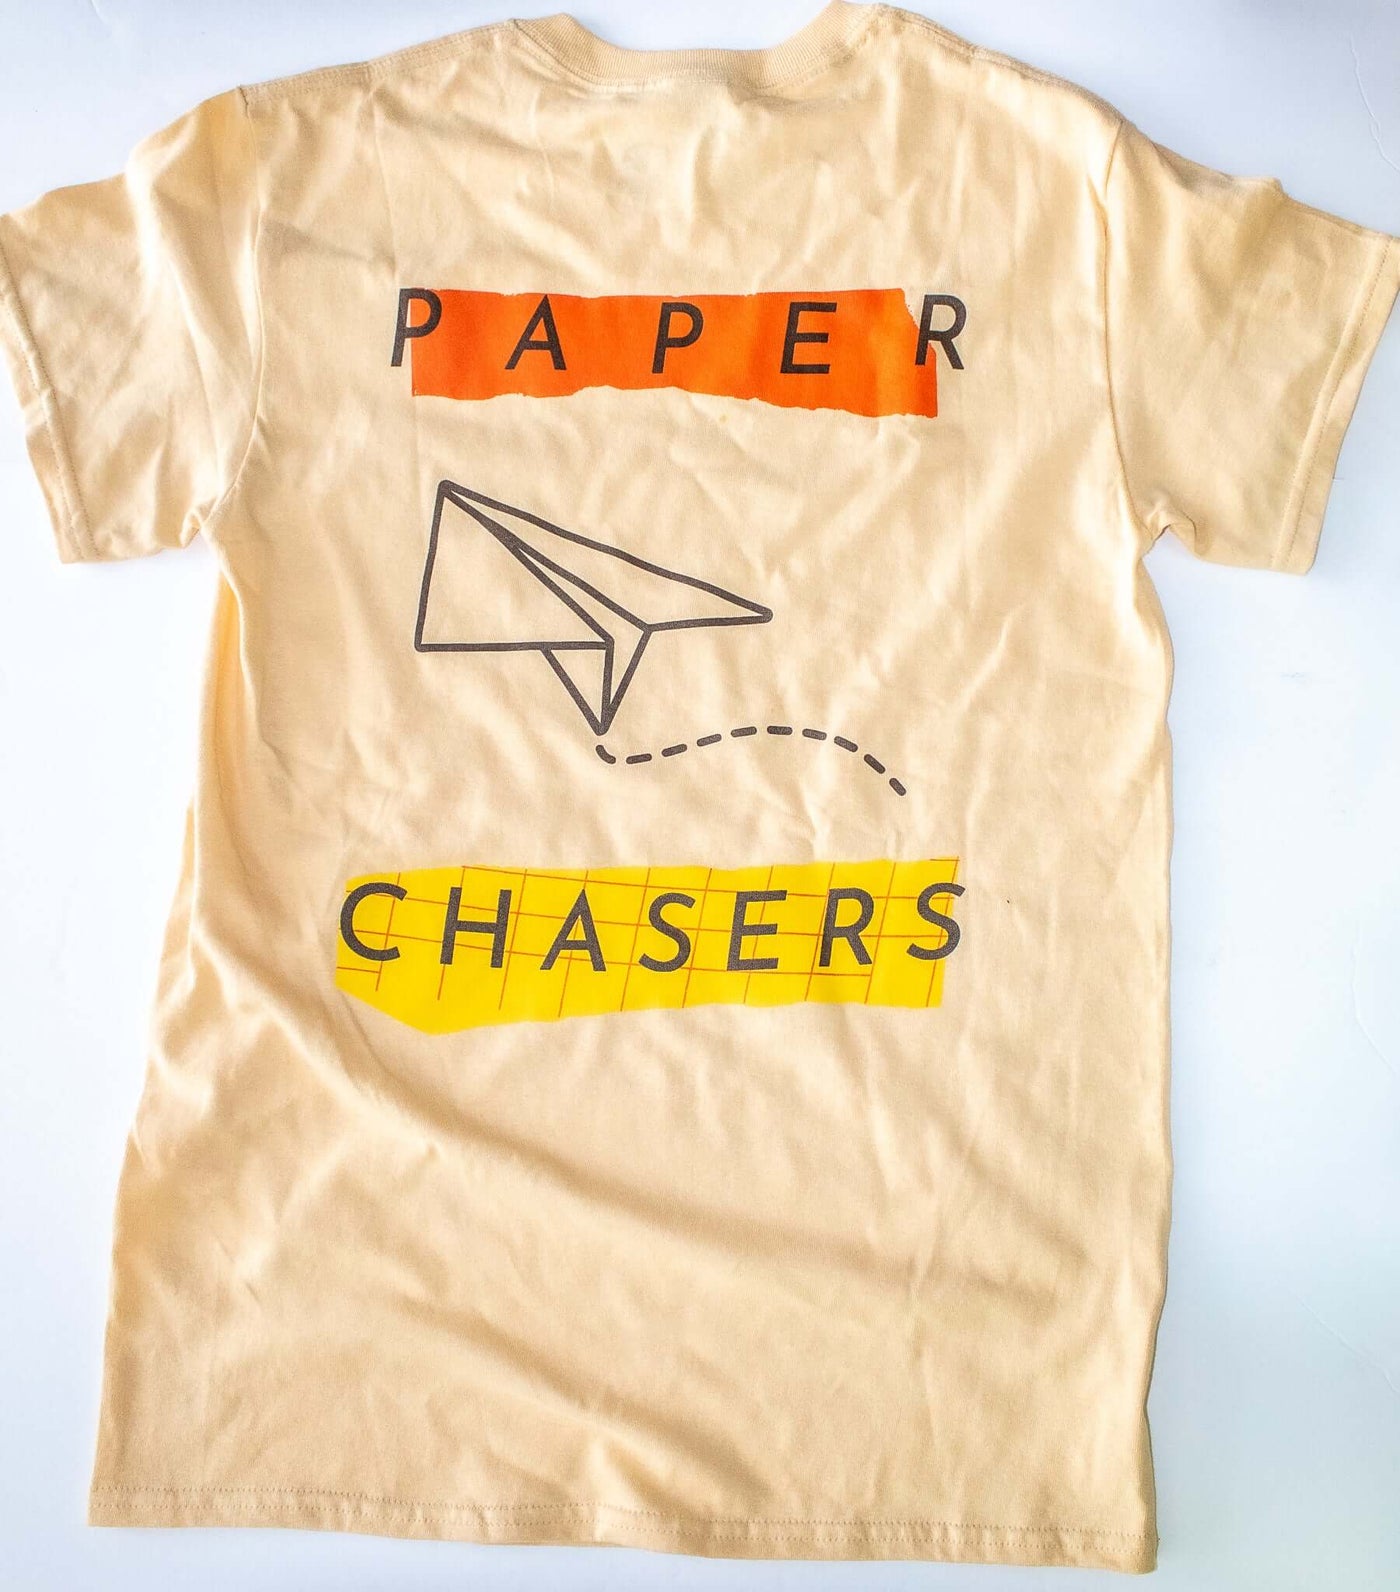 back of the tan colored "Paper Chasers T-Shirt" that has an illustration of a paper airplane in the middle.